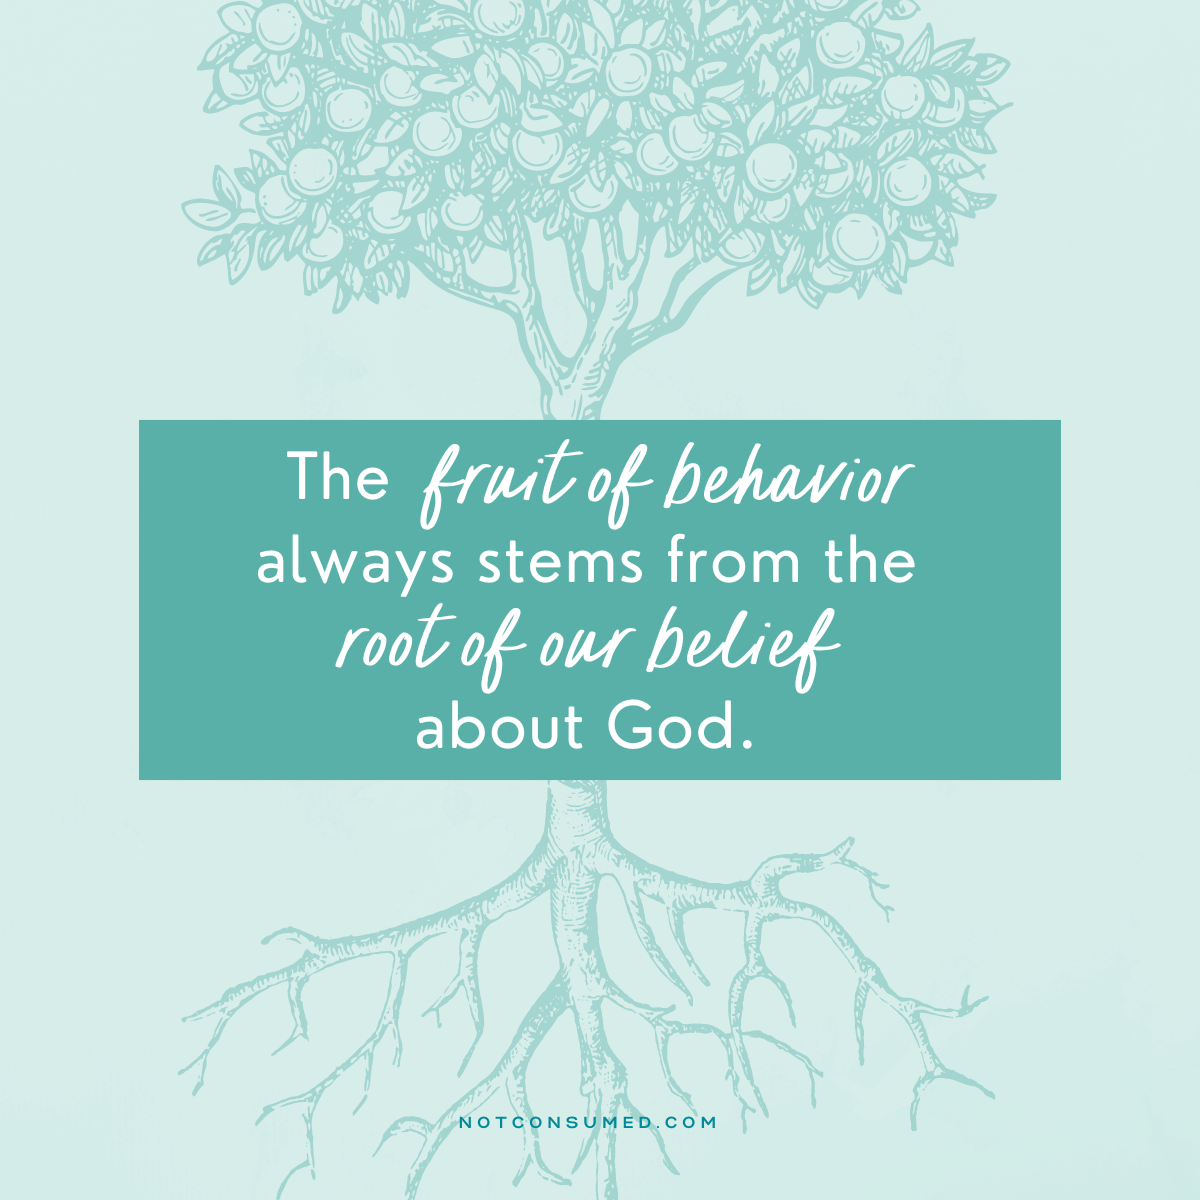 5 Truths Blog Post Quote - The root of what we believe about God